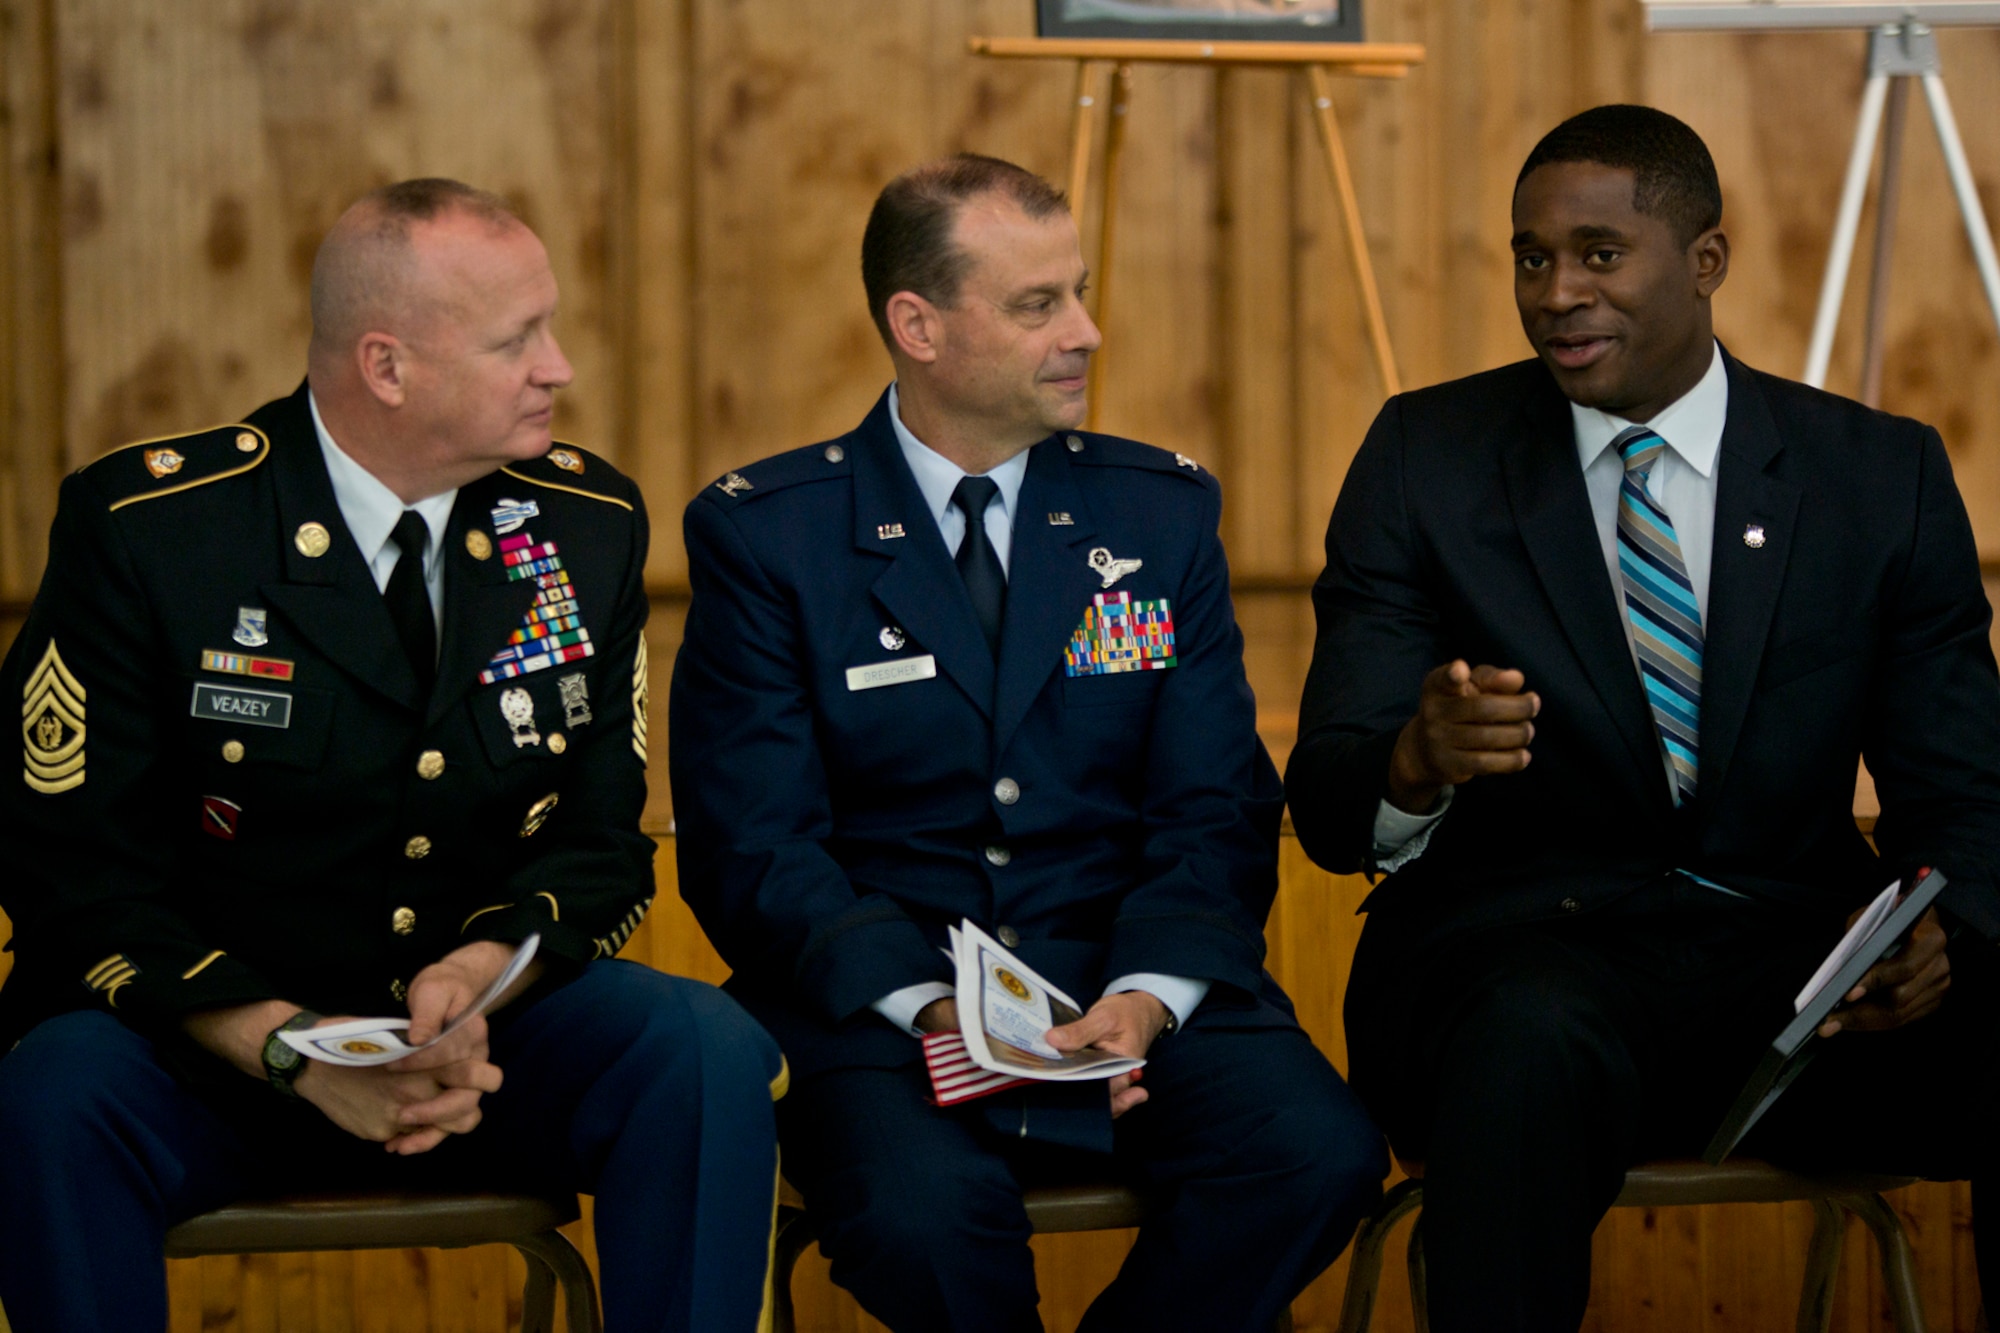 Command Sgt. Maj. Steven C. Veazey, senior enlisted leader, Arkansas Army National Guard, U.S. Air Force Reserve Col. Craig Drescher, commander, 913th Airlift Group and Mr. Isaac Henry, representing the City of North Little Rock Mayor’s office, converse before the start of the 11th Annual Tribute to Fallen Heroes Ceremony in Sherwood, Ark., Apr. 9, 2016.  The annual ceremony honors the memory of all Arkansans whom have fallen during the war against terrorism.  (U.S. Air Force photo by Master Sgt. Jeff Walston/released) 